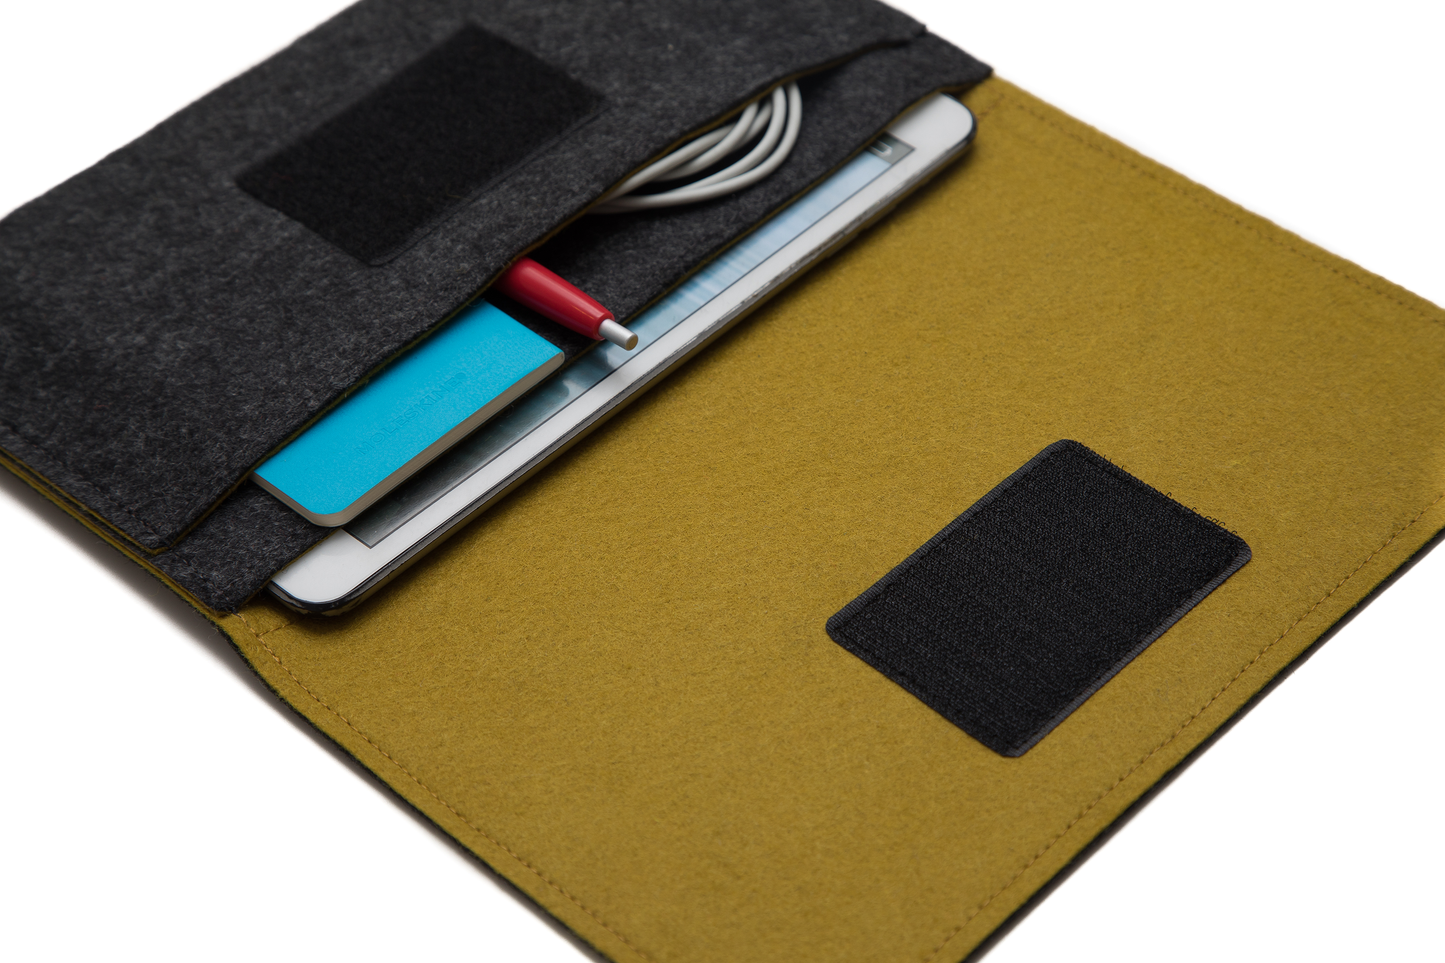 iPad Mini Felt Cover with Front Pocket and Velcro Closure